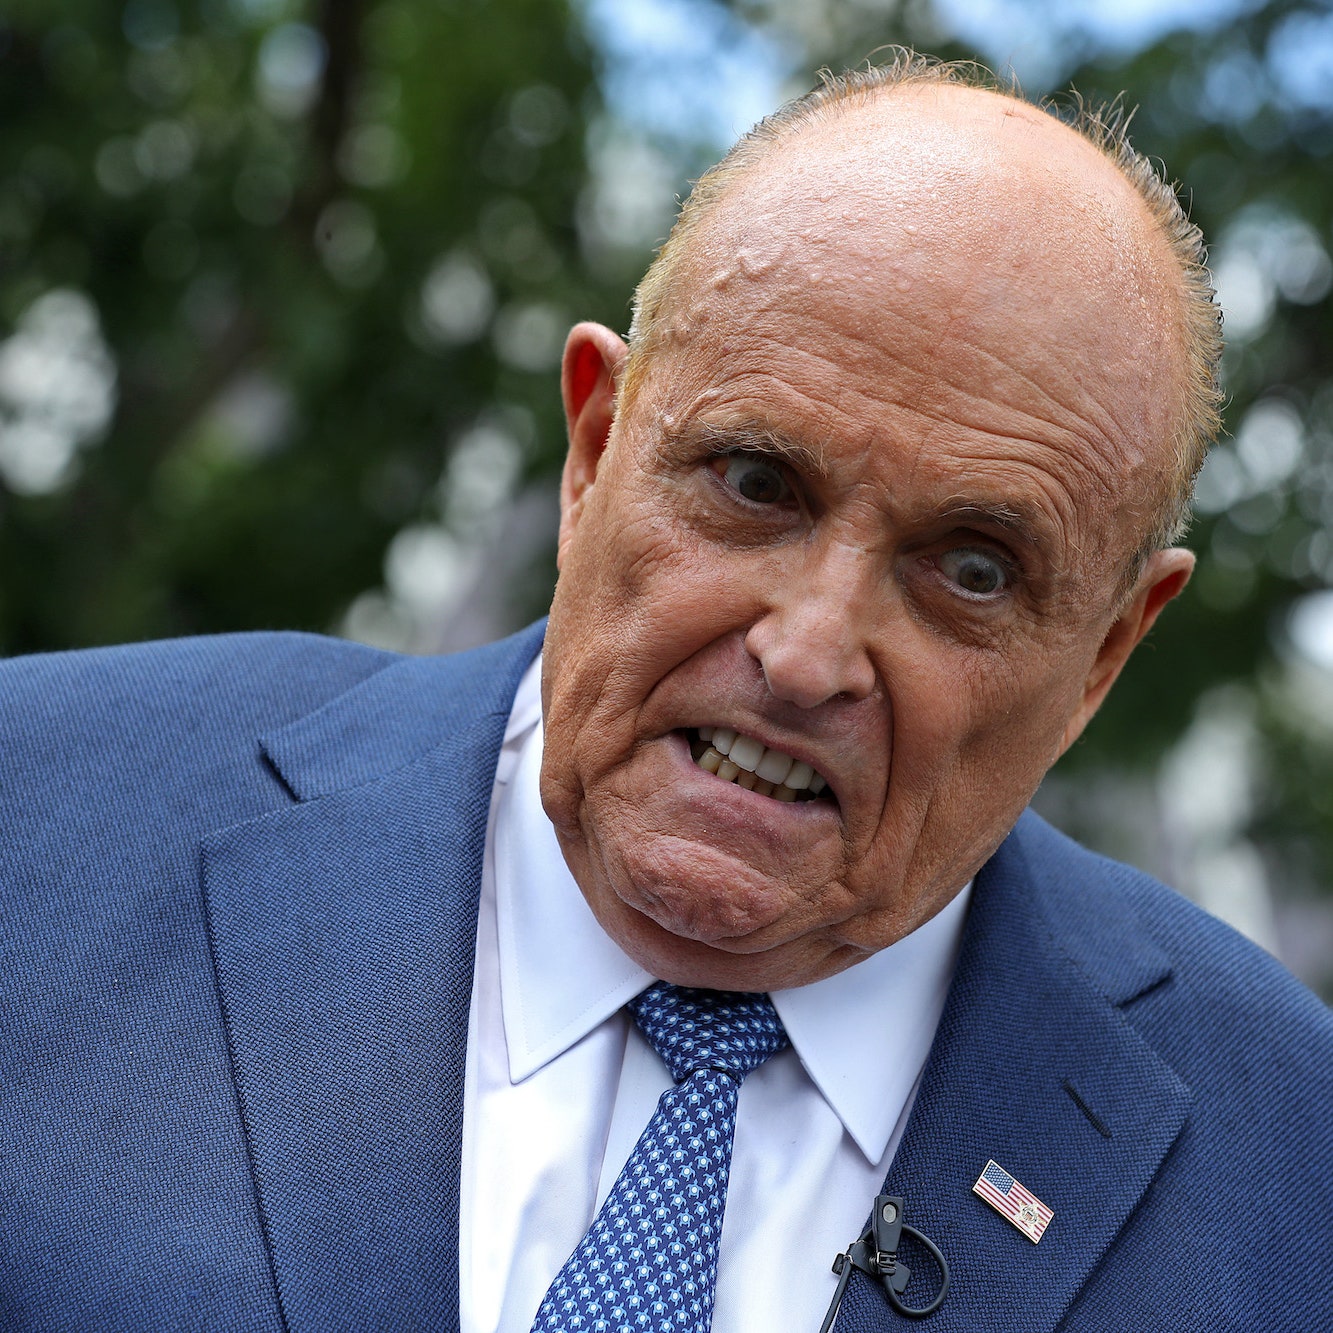 Rudy Giuliani, Who Filed for Bankruptcy Last Year, Can’t Get By on a $43,000-a-Month Budget